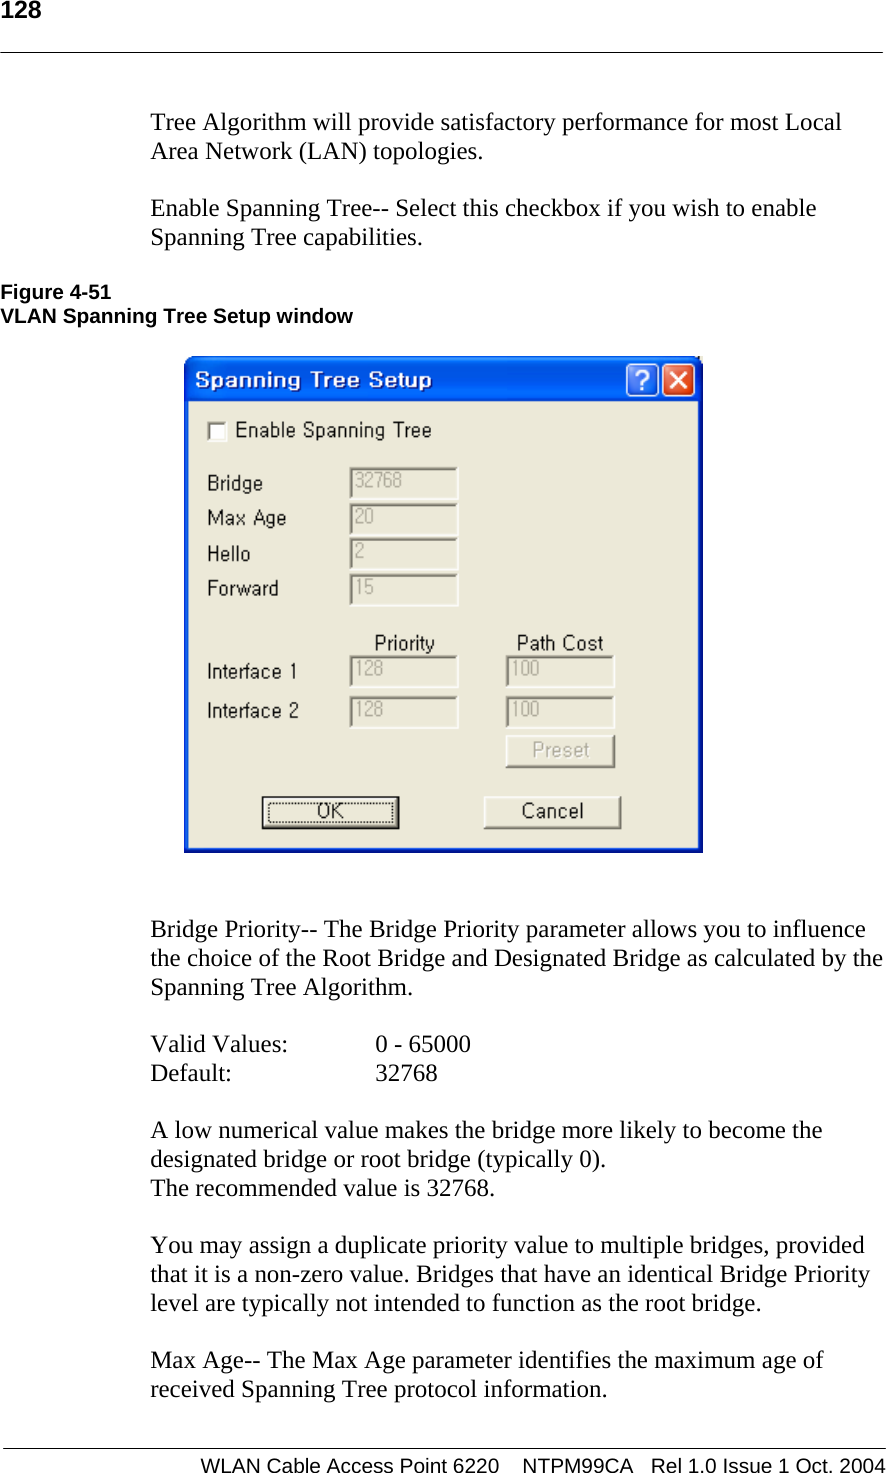   128   Tree Algorithm will provide satisfactory performance for most Local Area Network (LAN) topologies.   Enable Spanning Tree-- Select this checkbox if you wish to enable Spanning Tree capabilities.  Figure 4-51 VLAN Spanning Tree Setup window    Bridge Priority-- The Bridge Priority parameter allows you to influence the choice of the Root Bridge and Designated Bridge as calculated by the Spanning Tree Algorithm.  Valid Values:    0 - 65000 Default:   32768  A low numerical value makes the bridge more likely to become the designated bridge or root bridge (typically 0).  The recommended value is 32768.   You may assign a duplicate priority value to multiple bridges, provided that it is a non-zero value. Bridges that have an identical Bridge Priority level are typically not intended to function as the root bridge.  Max Age-- The Max Age parameter identifies the maximum age of received Spanning Tree protocol information.  WLAN Cable Access Point 6220    NTPM99CA   Rel 1.0 Issue 1 Oct. 2004